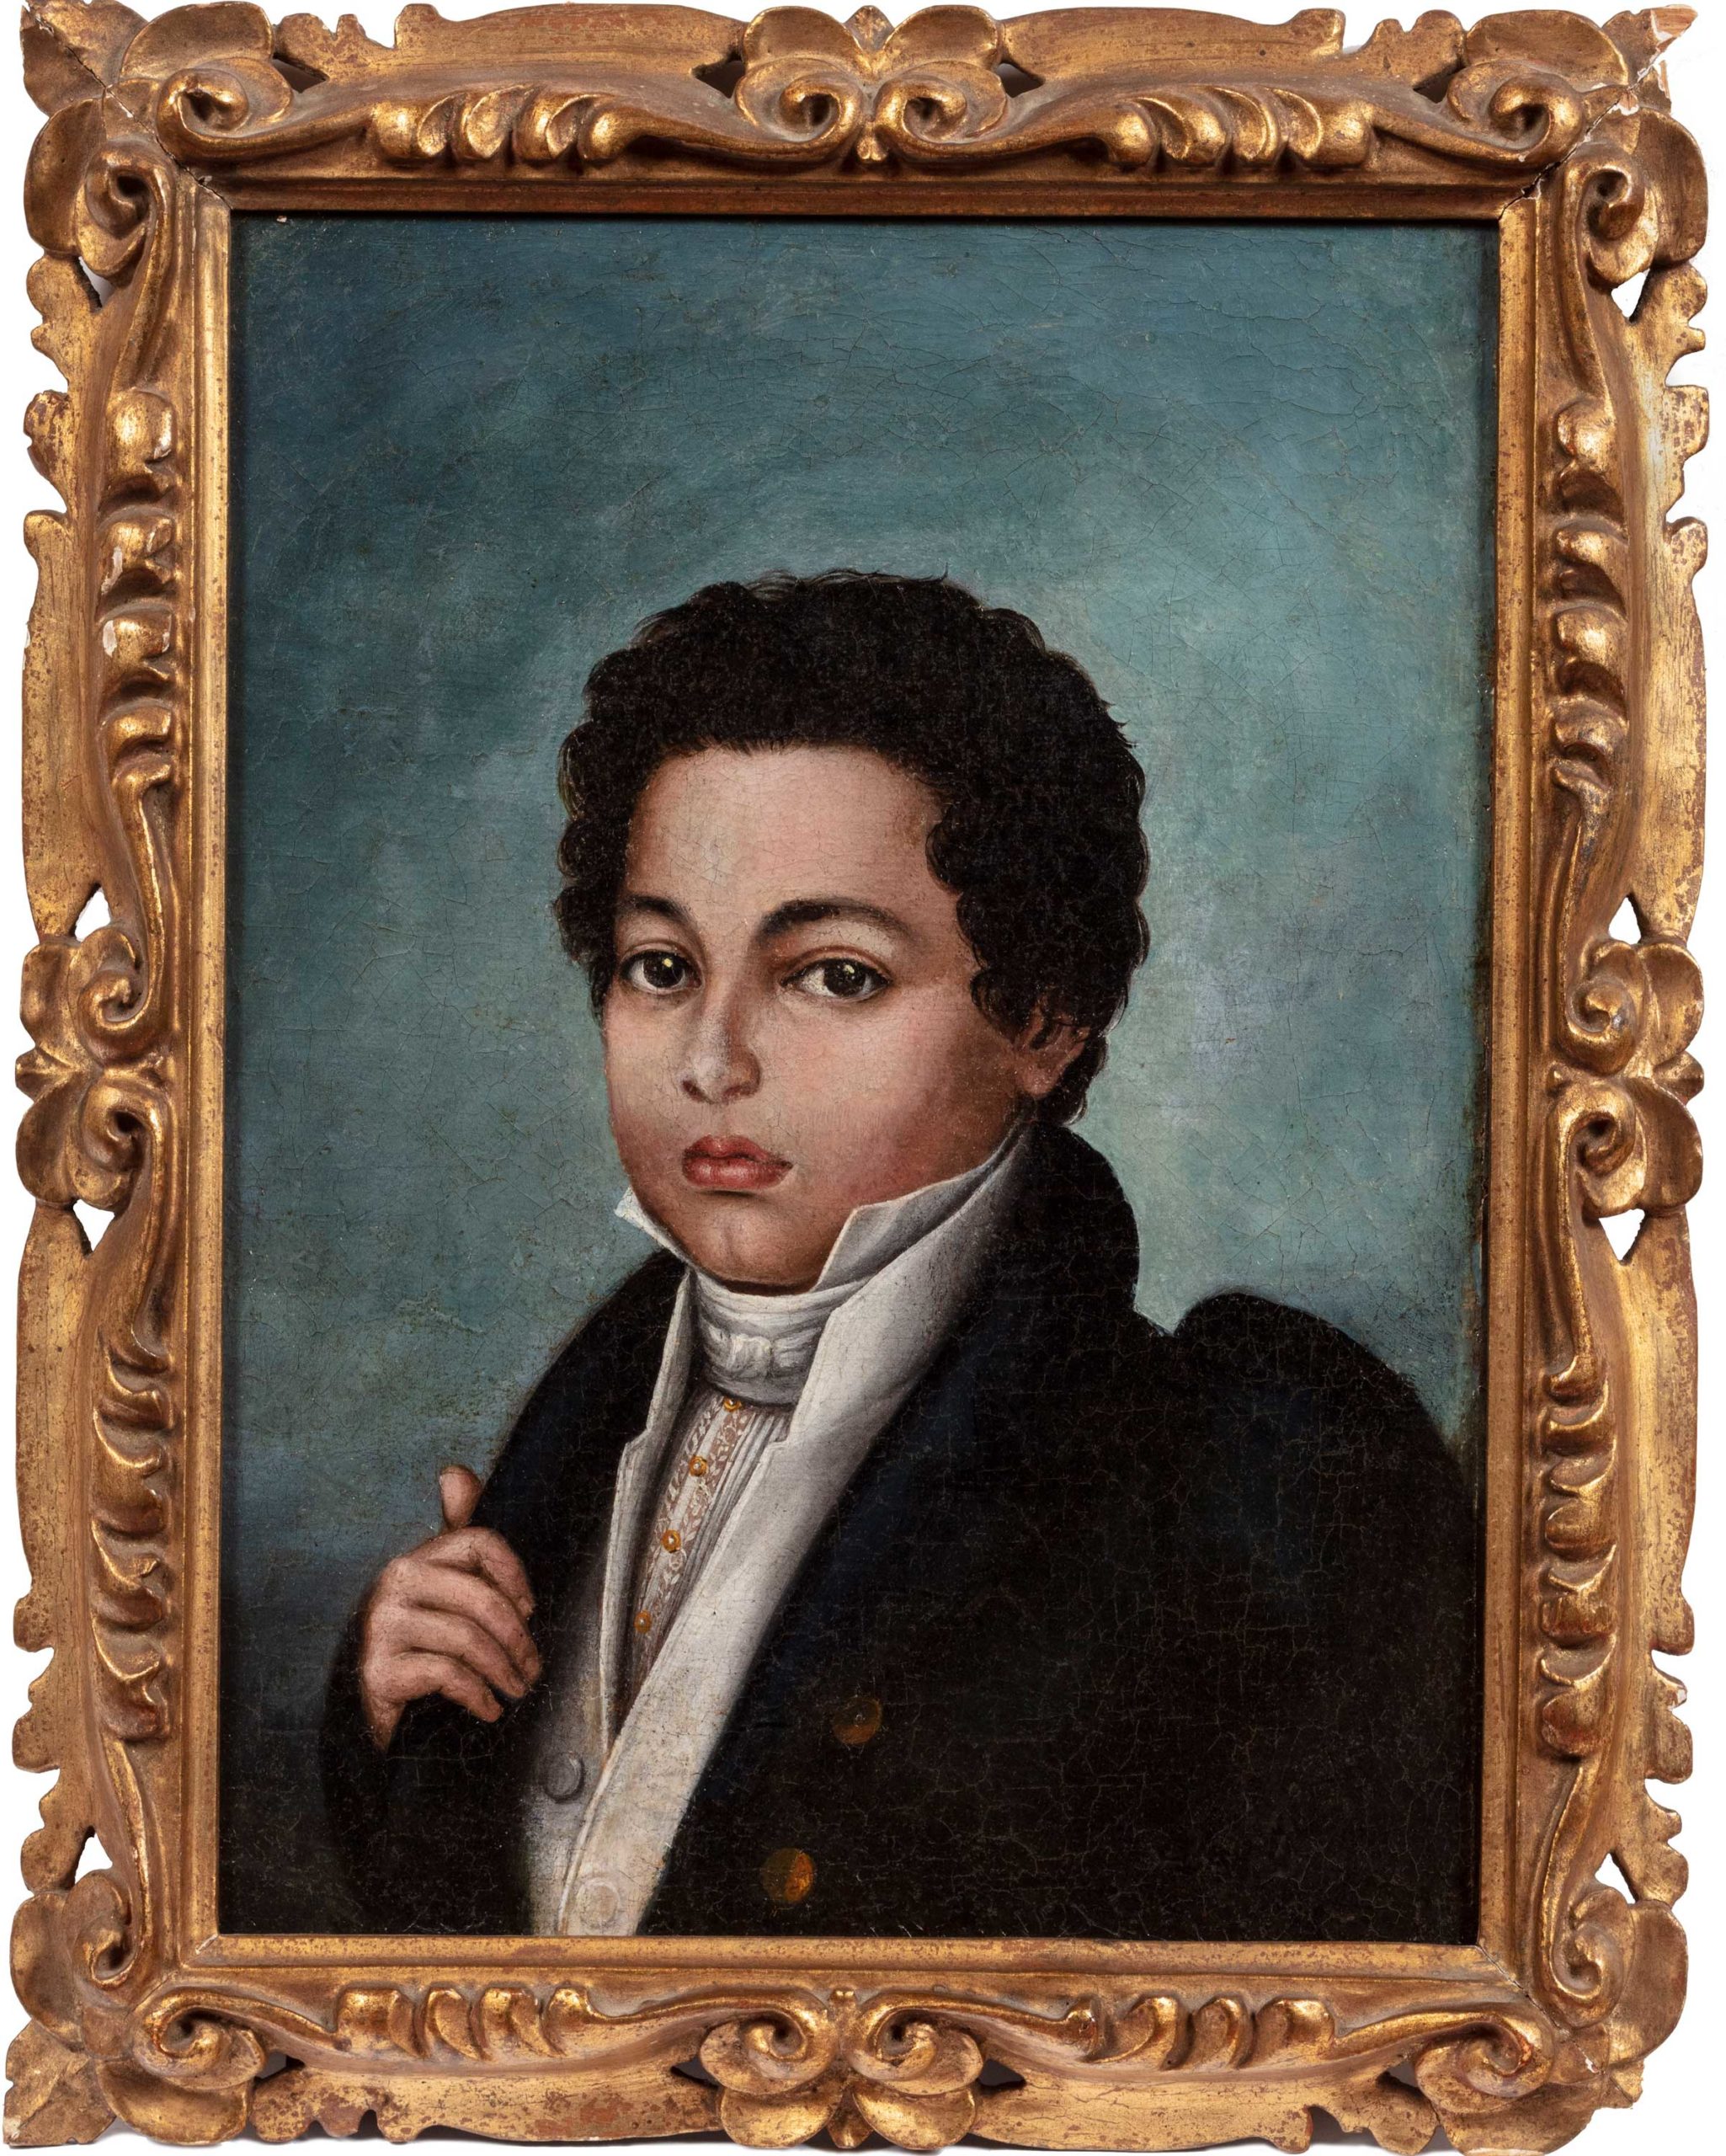 Portrait painting - Circle of Julien Hudson (New Orleans, mid-19th century), "Portrait of a Youth," oil on canvas, 12 x 8 7/8 inches.